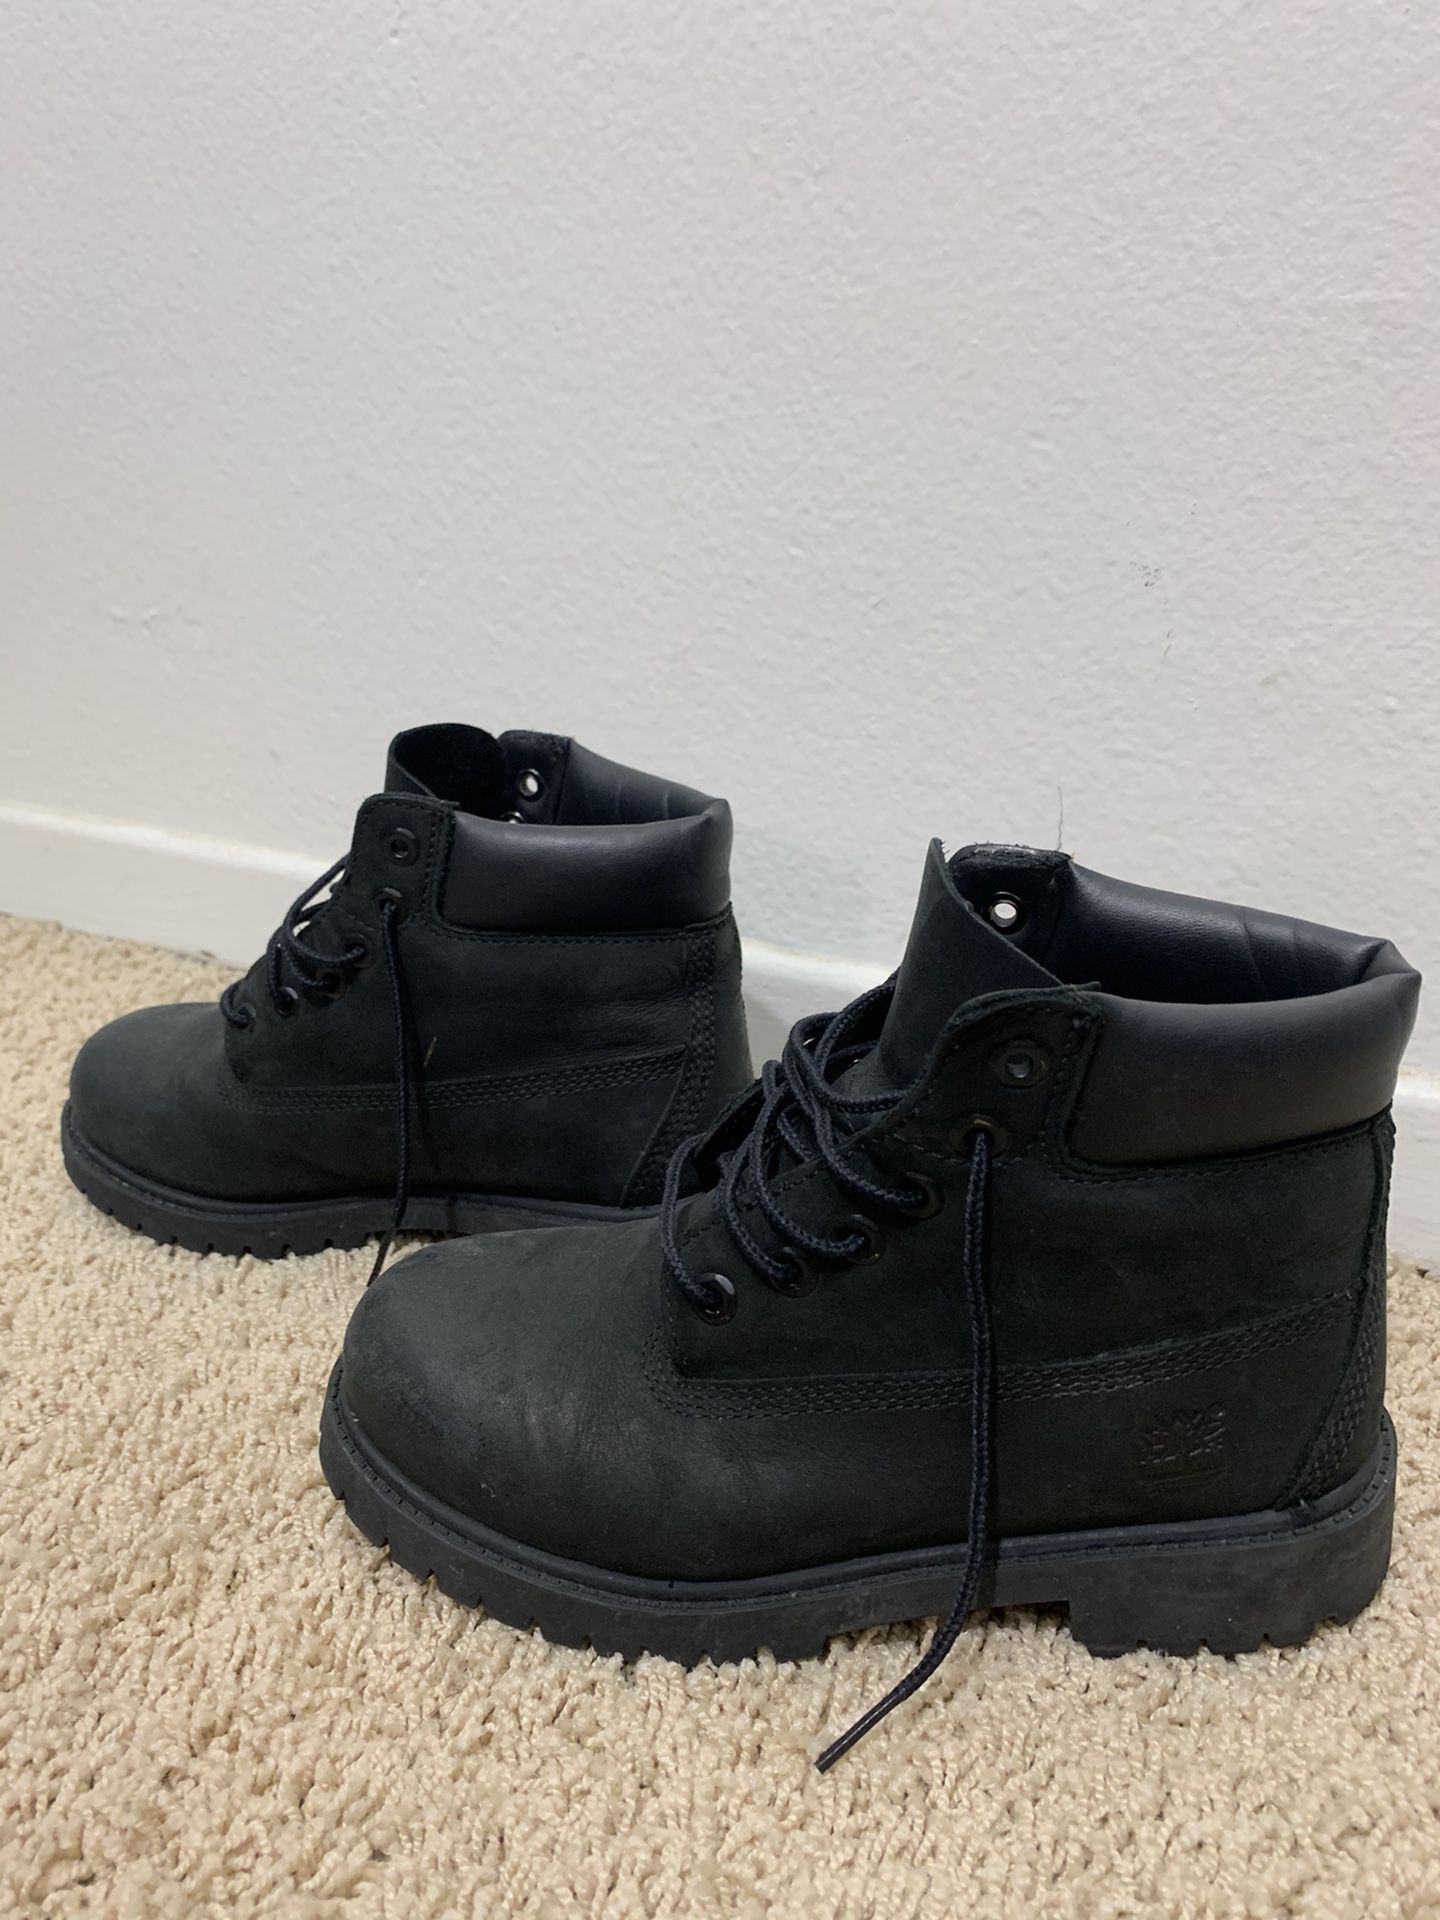 Black Timberland Boots Sz 2 youth